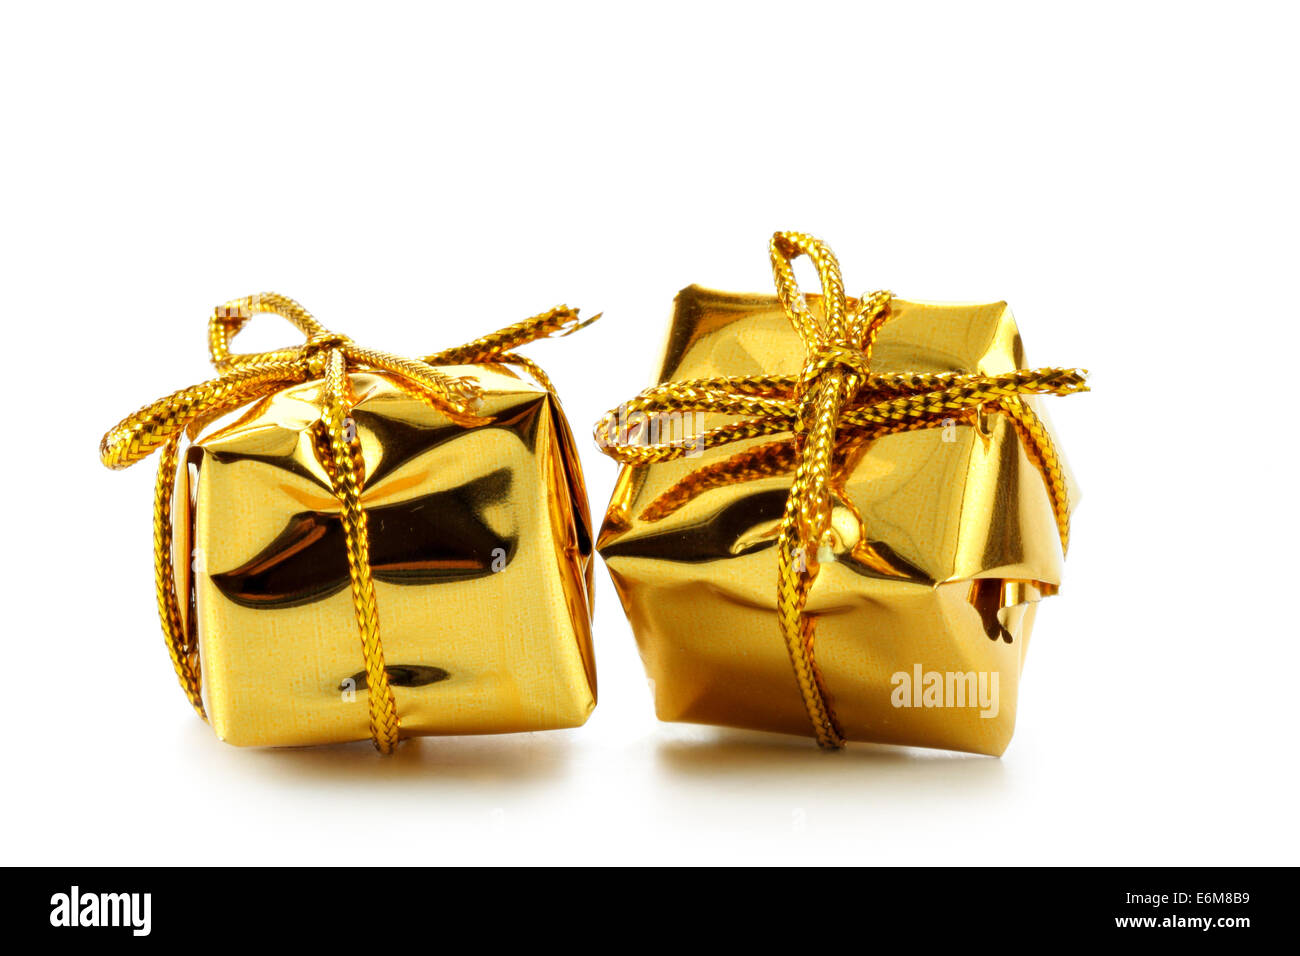 Two golden boxes isolated over white background Stock Photo